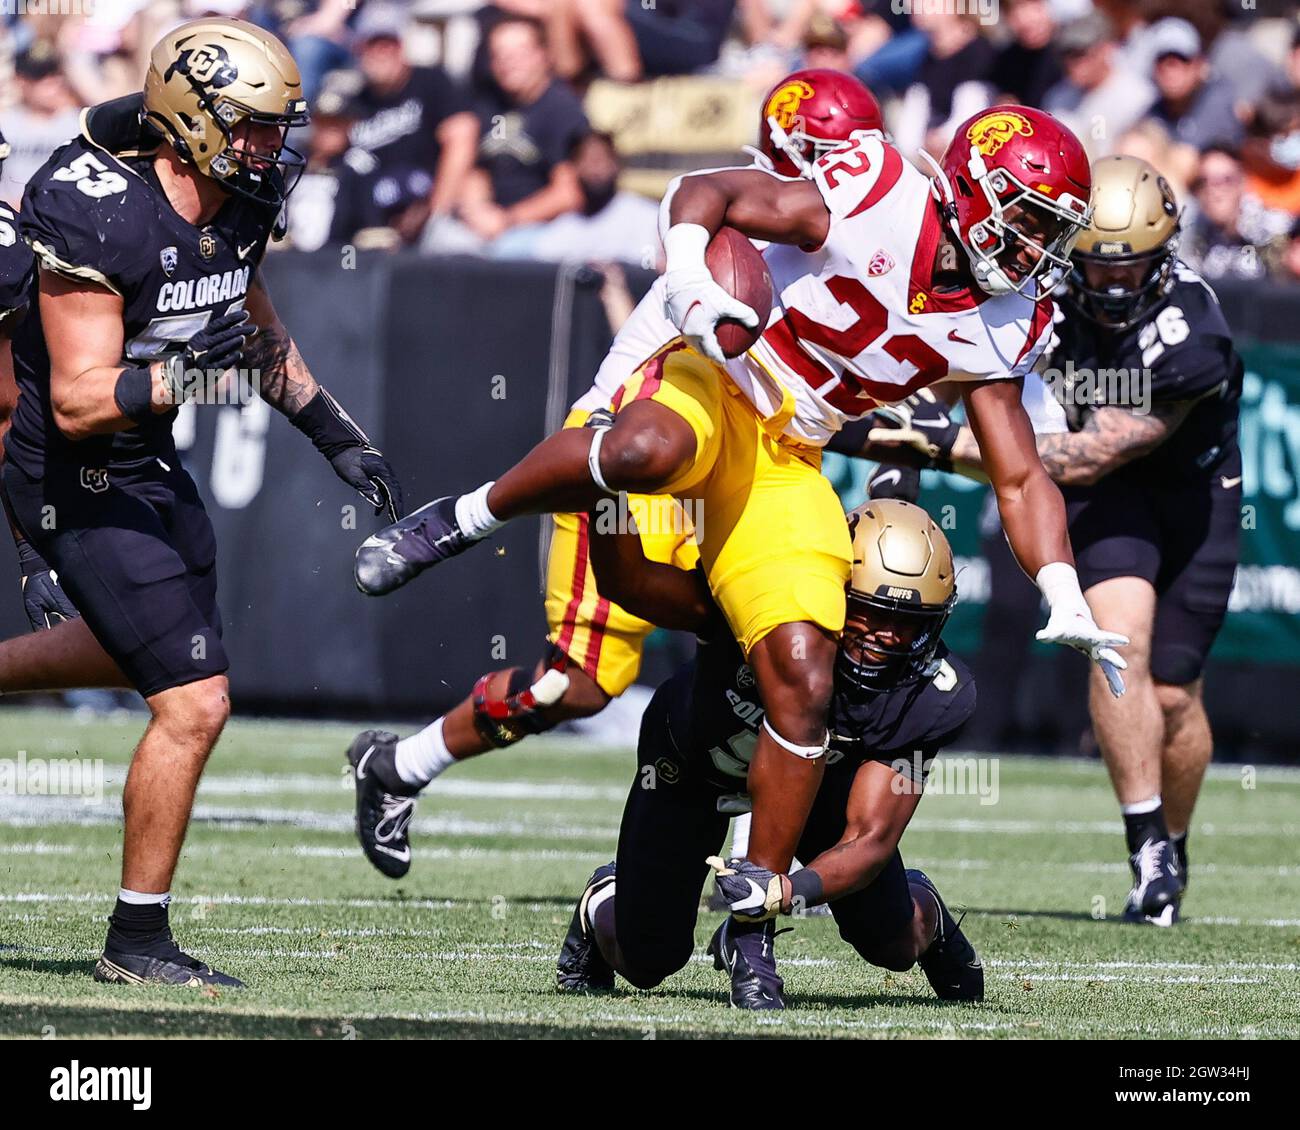 Boulder, CO, USA. 02nd Oct, 2021. Colorado Buffaloes safety Mark Perry (5) tackles USC Trojans wide receiver Jack Webster (22) by the ankle in the football game between Colorado and USC at Folsom Field in Boulder, CO. Colorado lost 37-14. Derek Regensburger/CSM/Alamy Live News Stock Photo